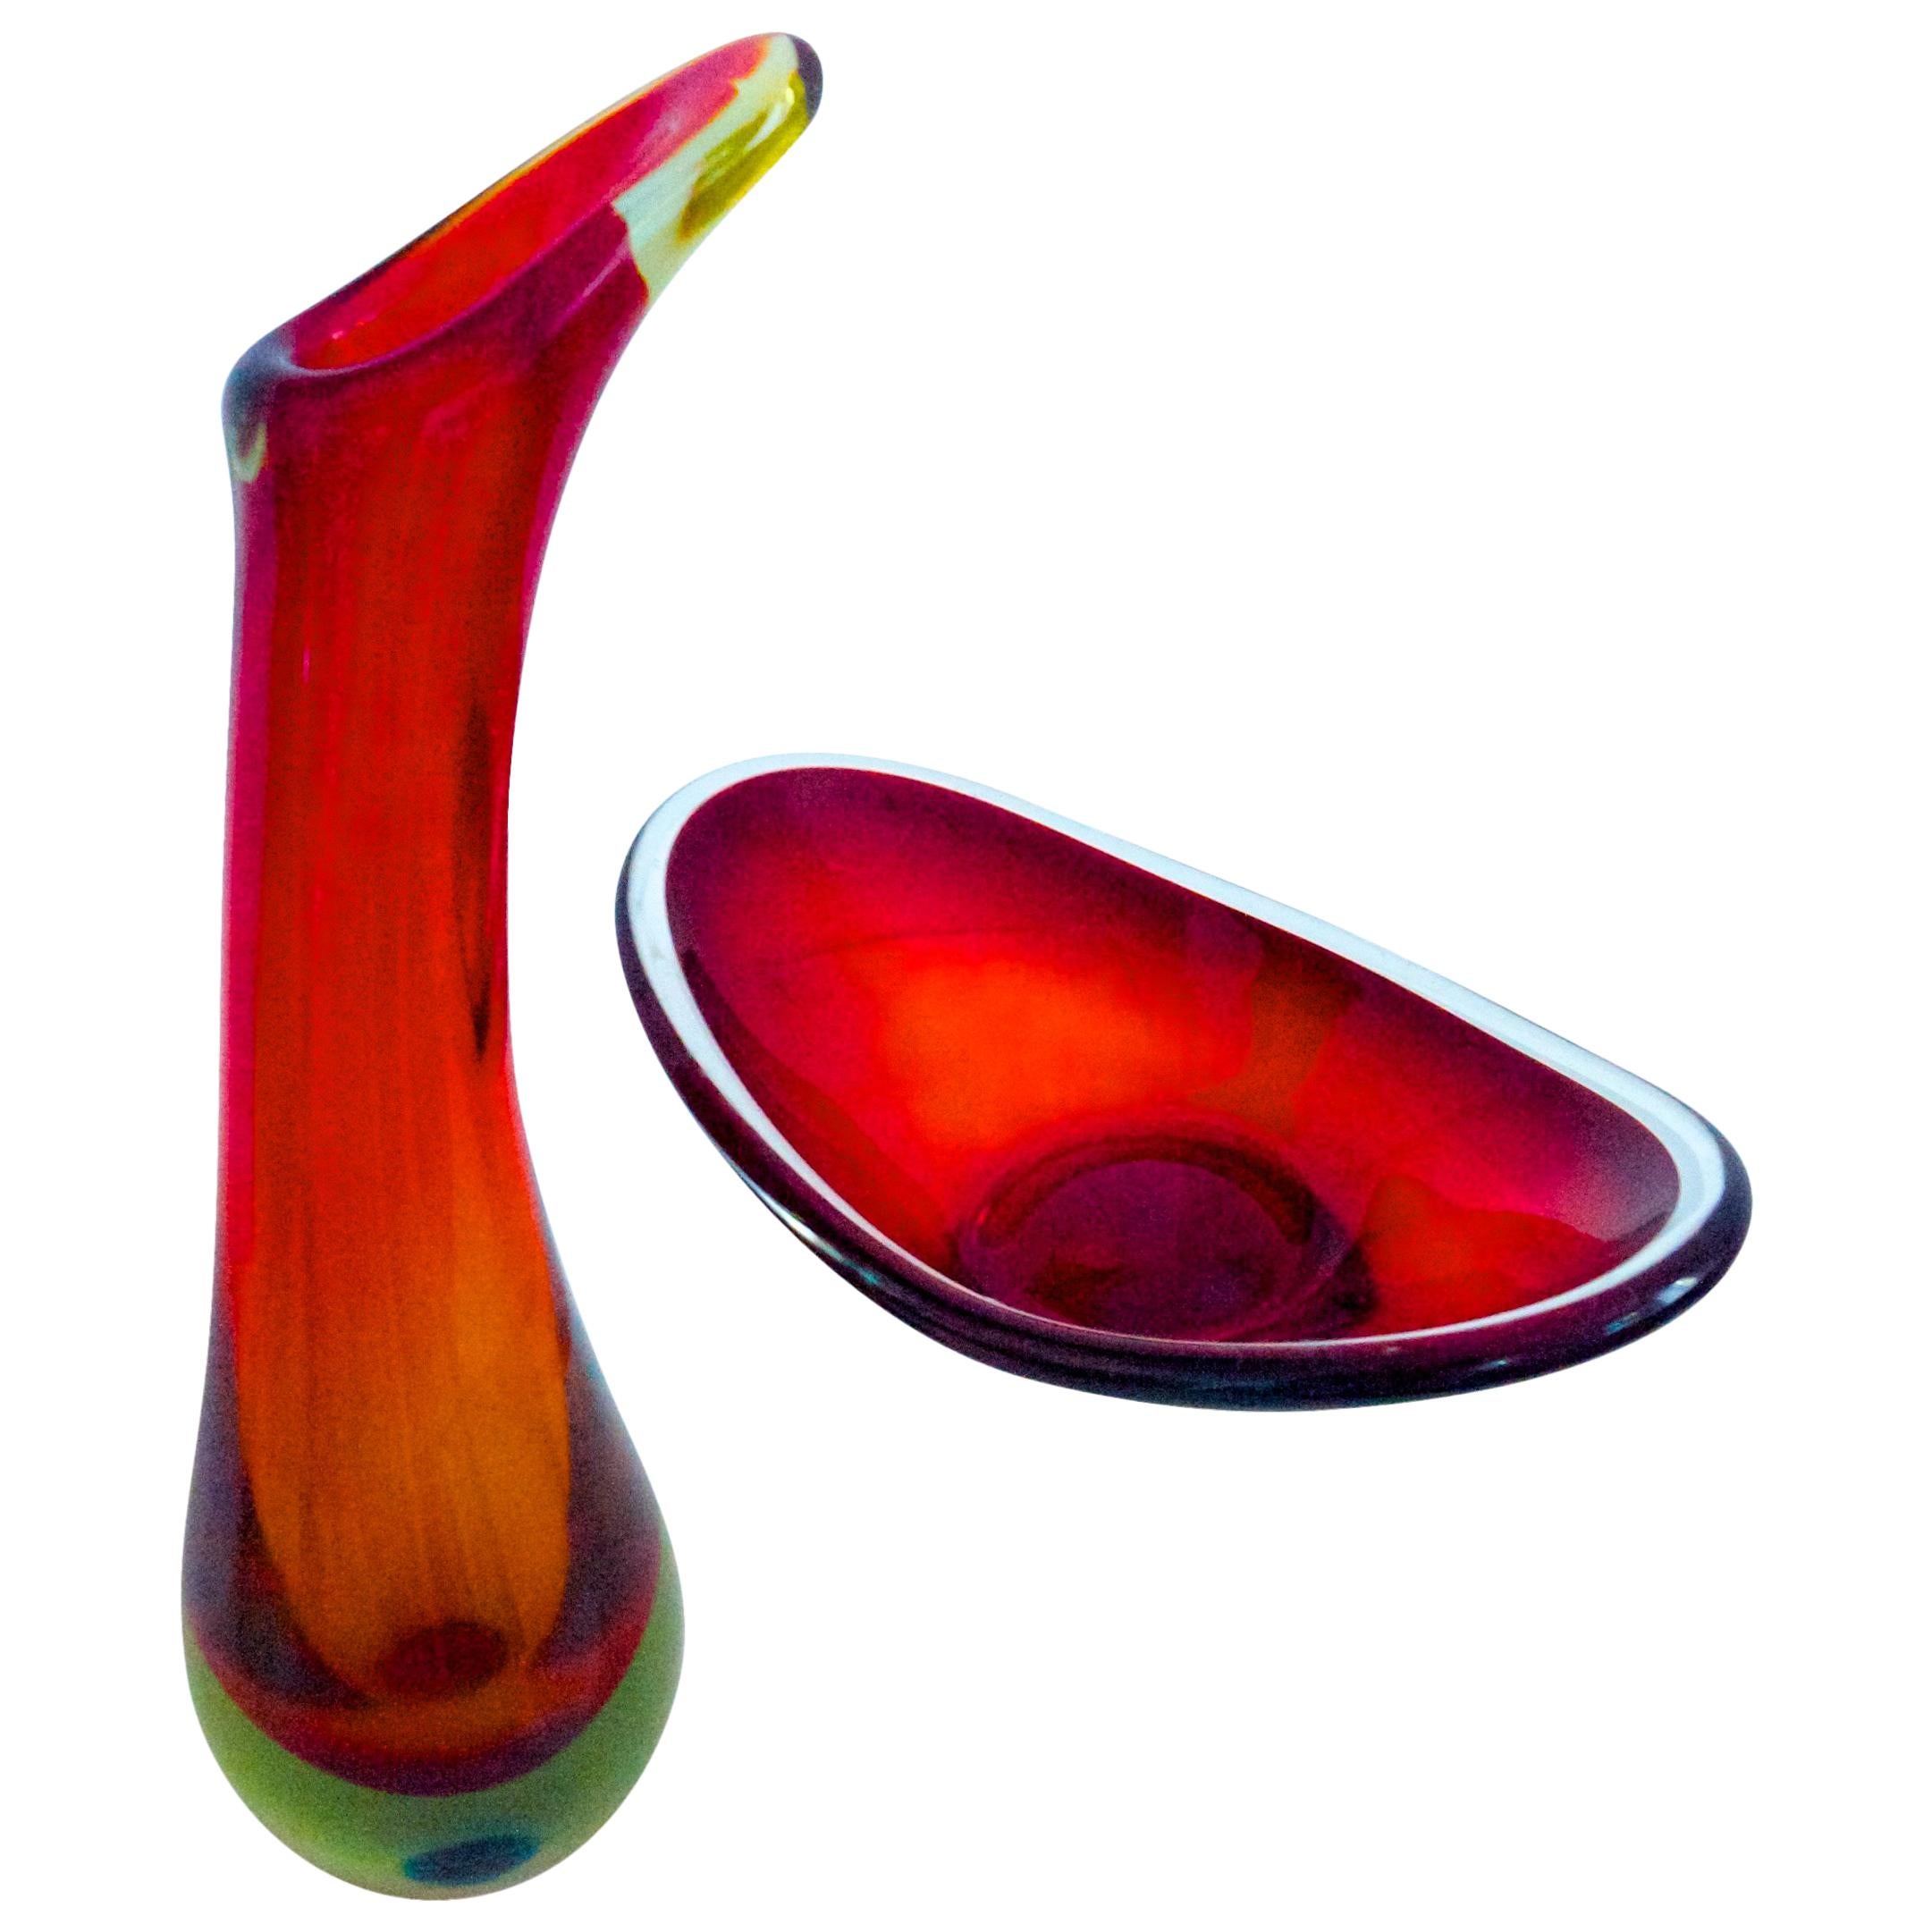 Italian Modernist Murano Sommerso Vase by Flavio Poli with Dish For Sale